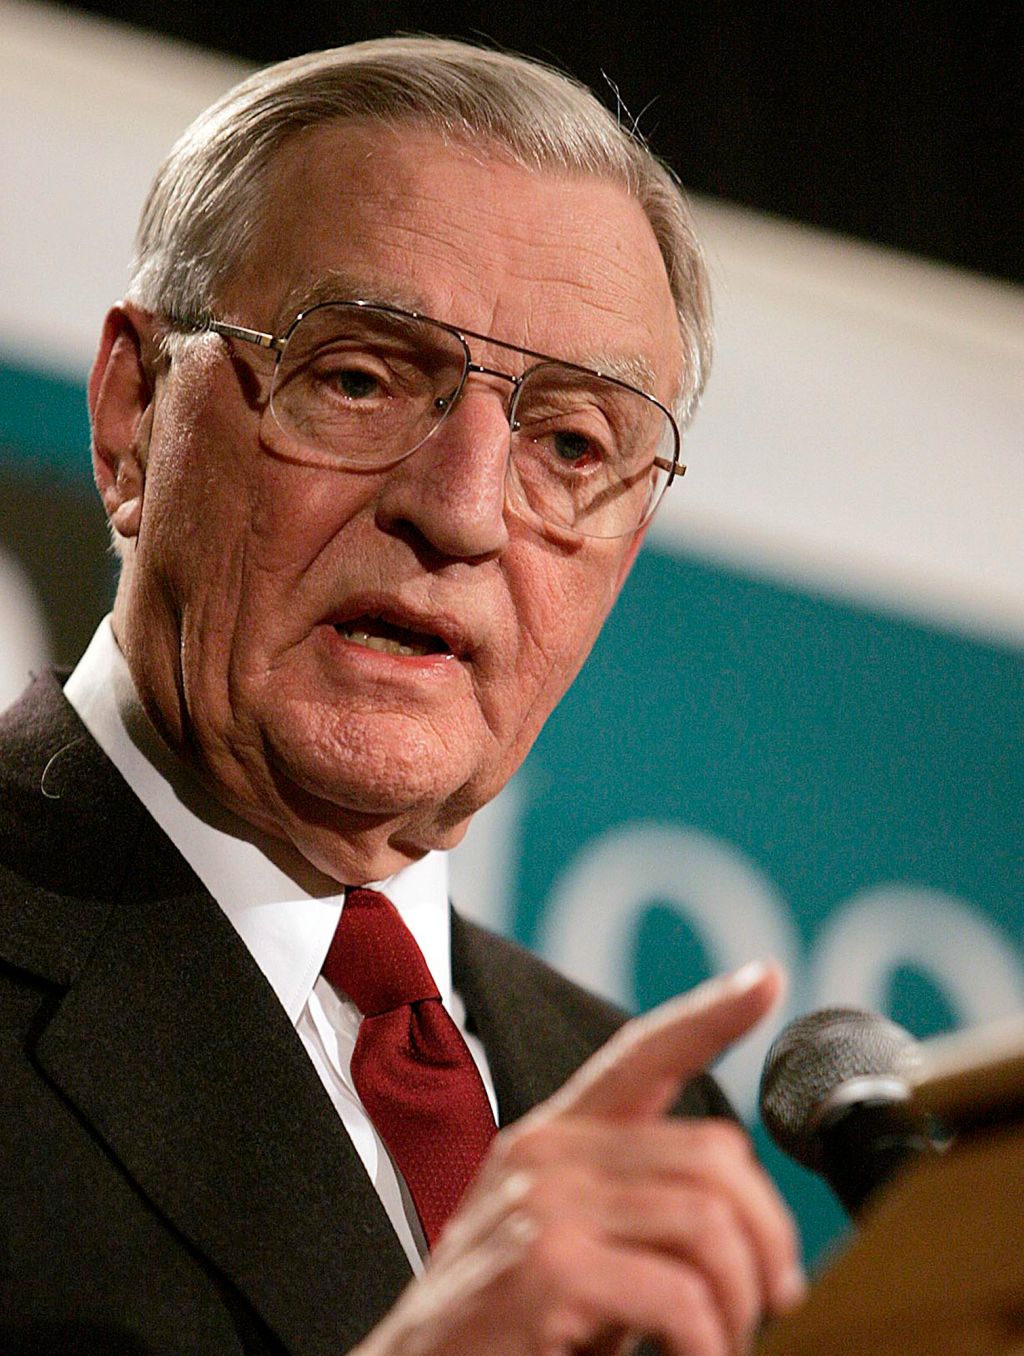 2005: Former VP Walter Mondale through the years